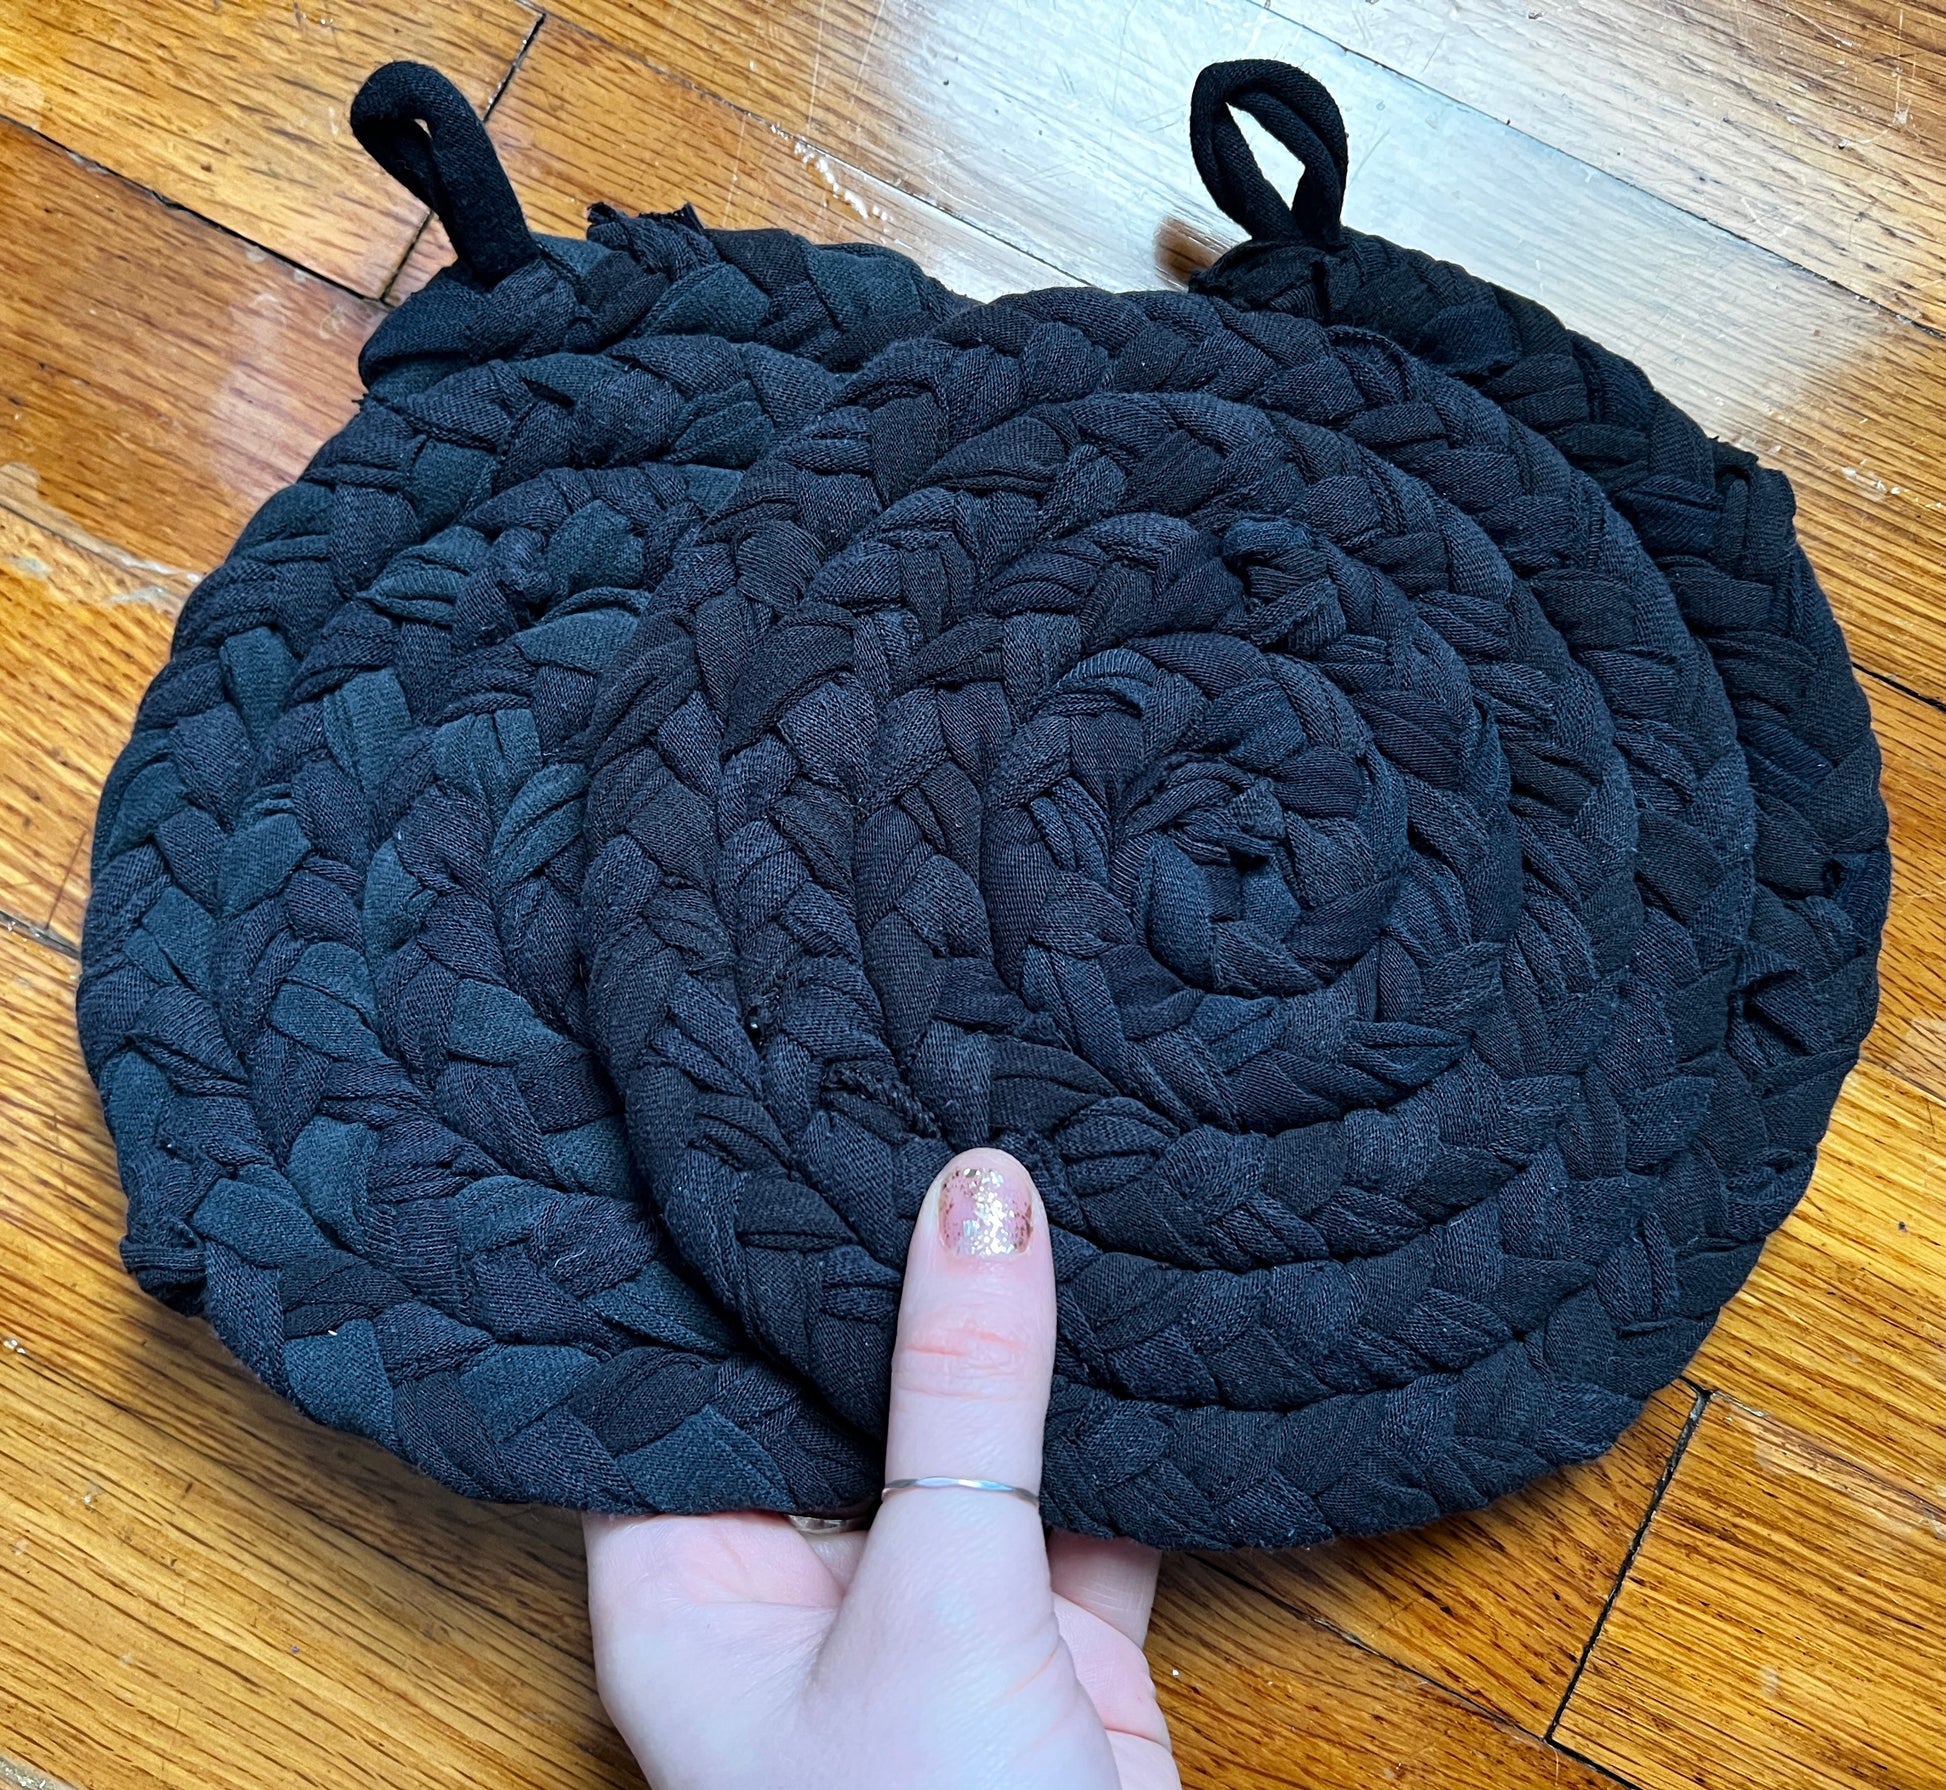 All Black potholders in hand for scale, against a wood background